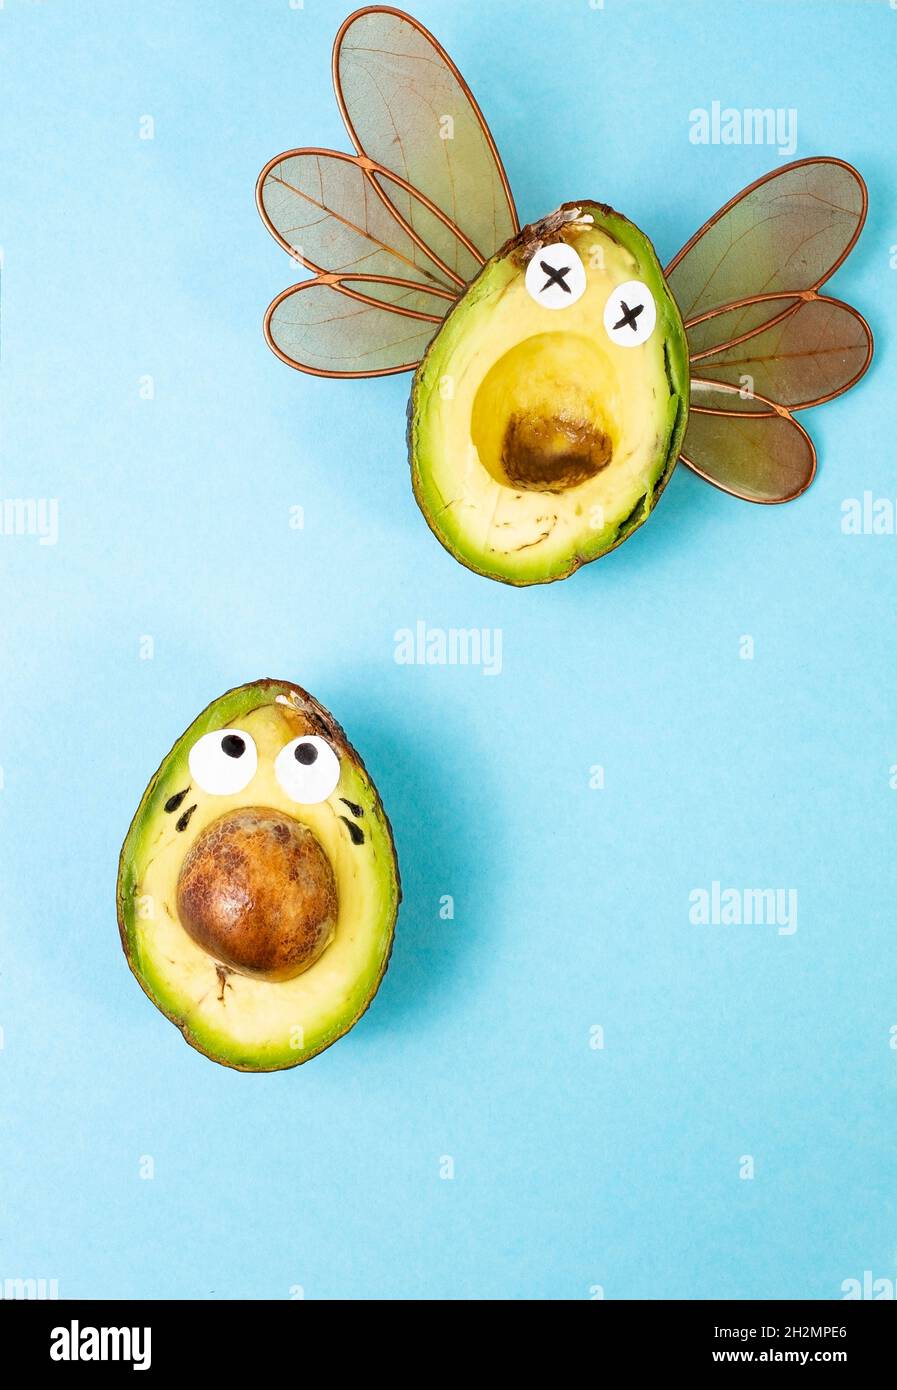 2 halves of avocado fruit making faces (dead and scared), with dragonfly wings on bright blue background. Stock Photo